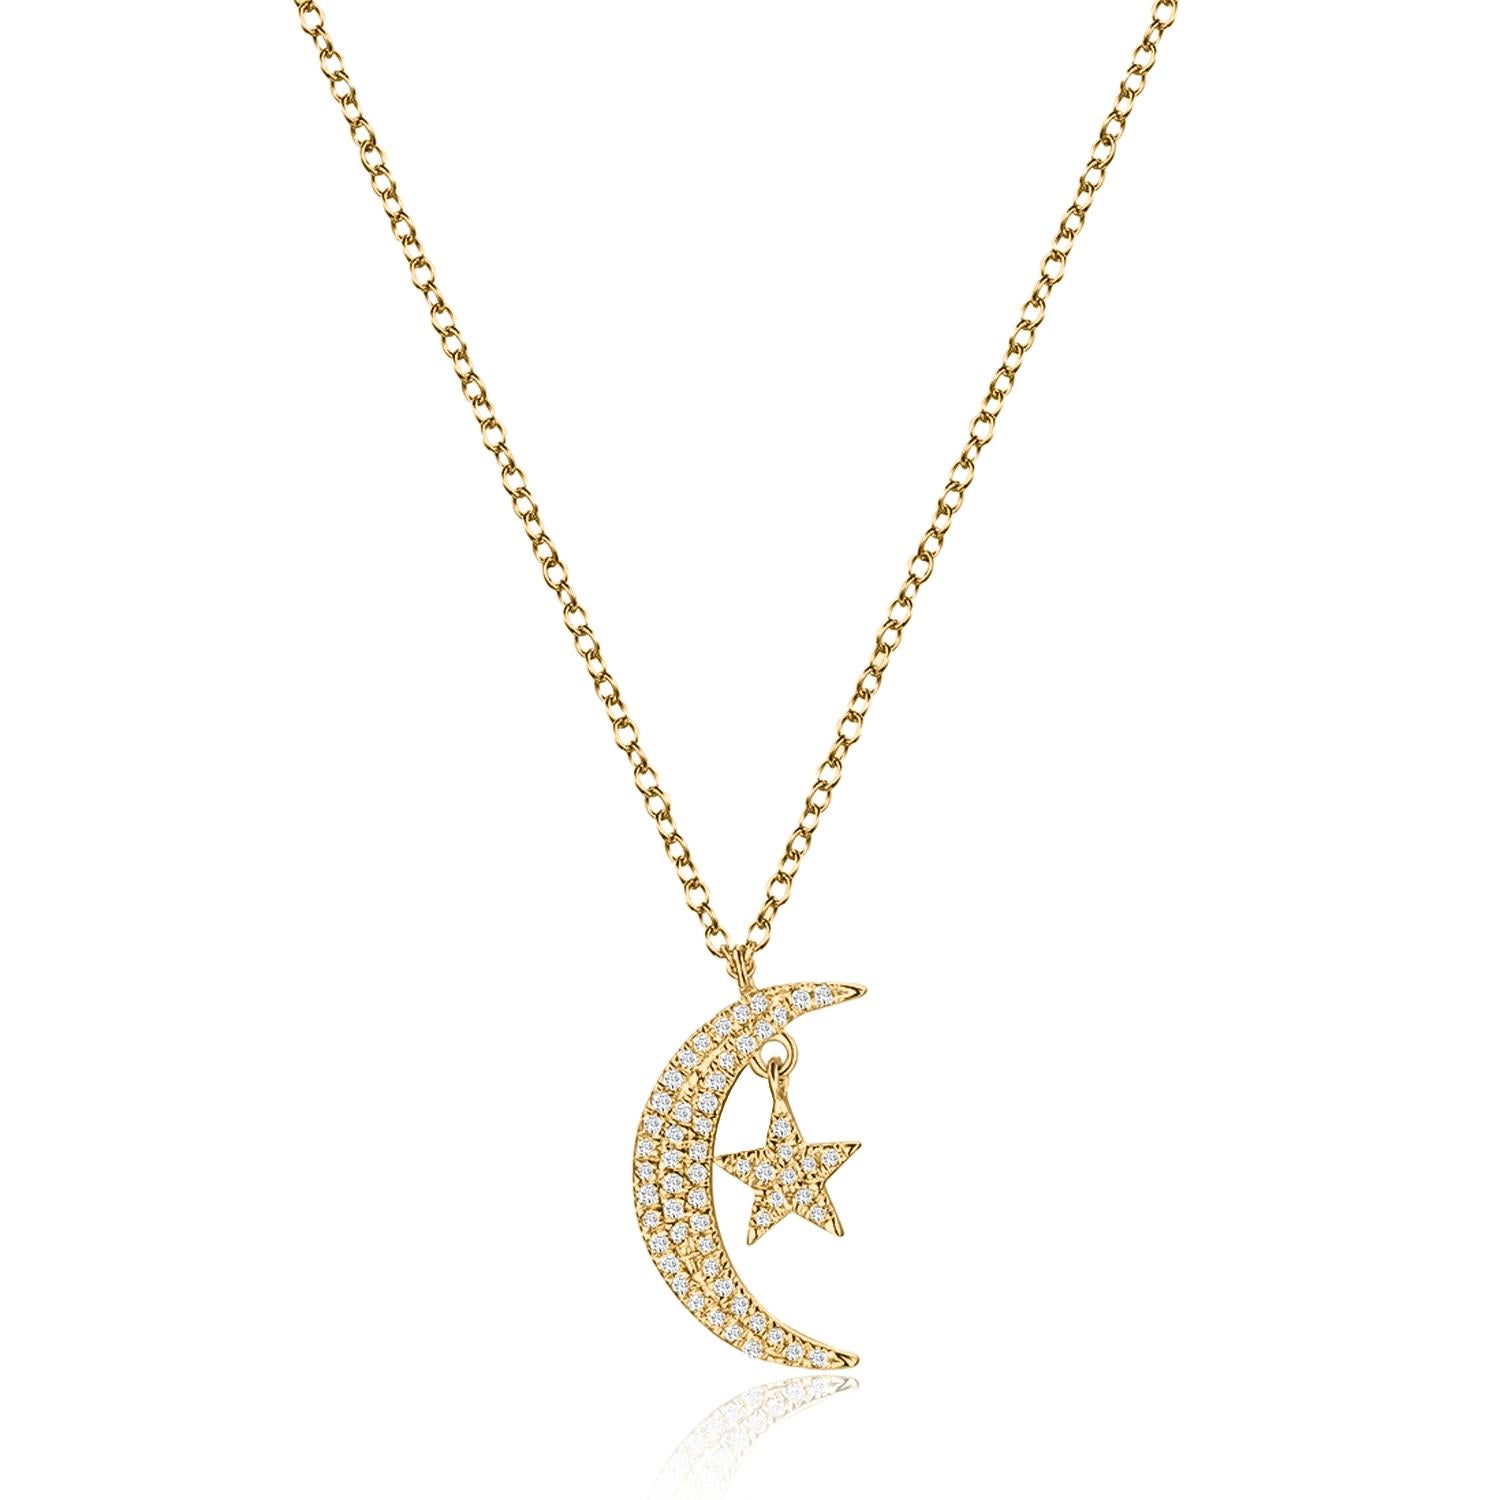 14k Gold Mini Moon and Star Diamond Necklace

Necklace Information
Diamond Type : Natural Diamond
Metal : 14k Gold
Metal Color : Rose Gold, Yellow Gold, White Gold
Total Carat Weight : 0.164 ttcw
Diamond colour-clarity : G/H Color VS/Si1 Clarity
